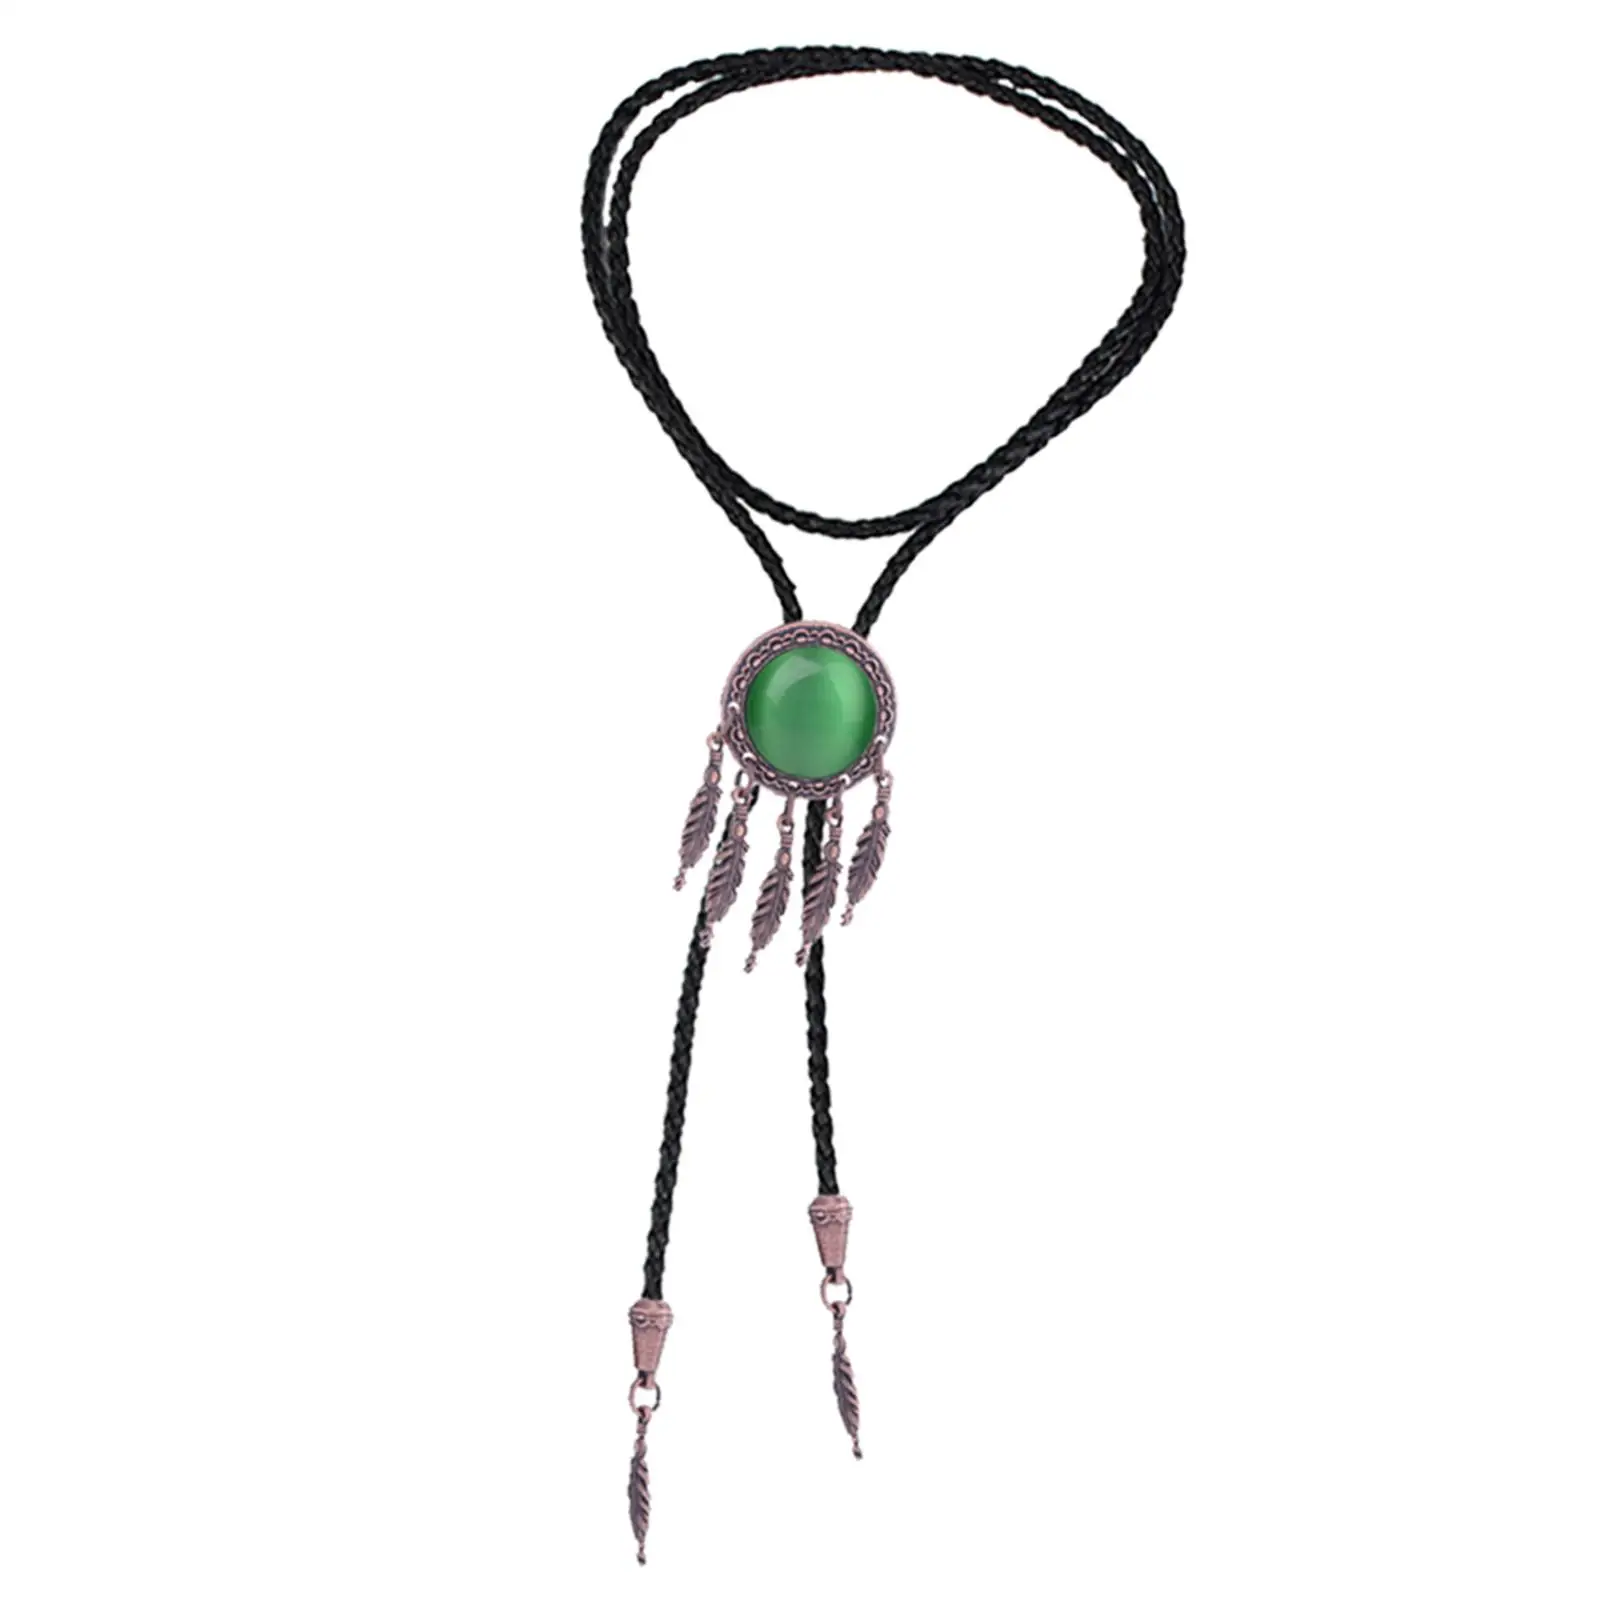 Retro Style Bolo Tie for Men PU Leather Rope Necklace Clothes Accessory